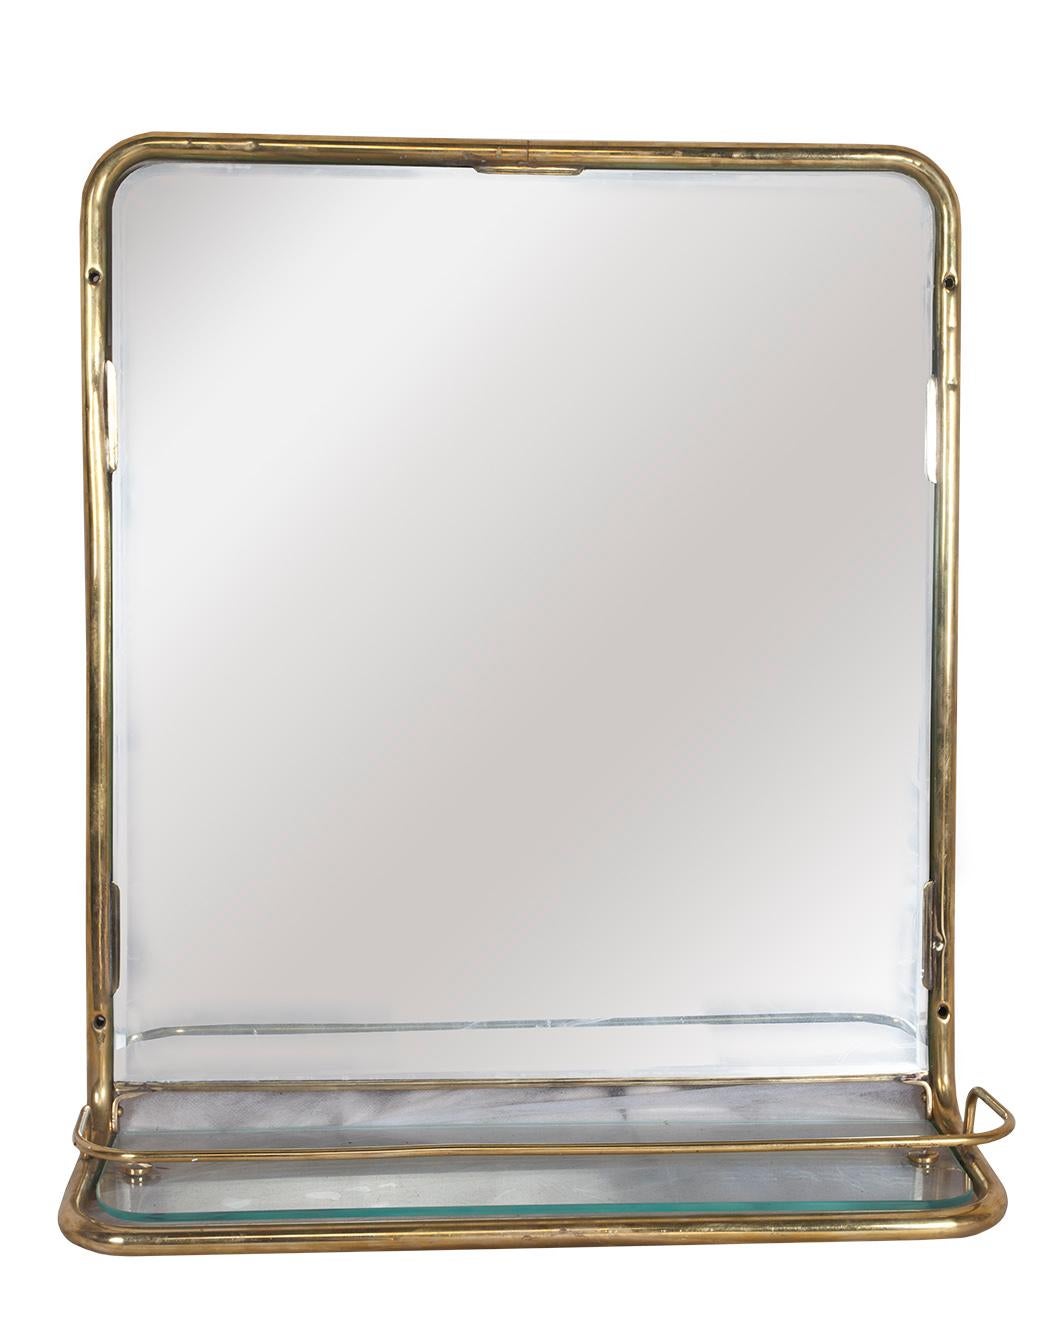 A great brass wall mirror from the stateroom of a decommissioned European cruise ship. It features a new mirror and glass shelf with the original brass railing around it, circa 1960s. When found, these had been slathered with white paint and all the